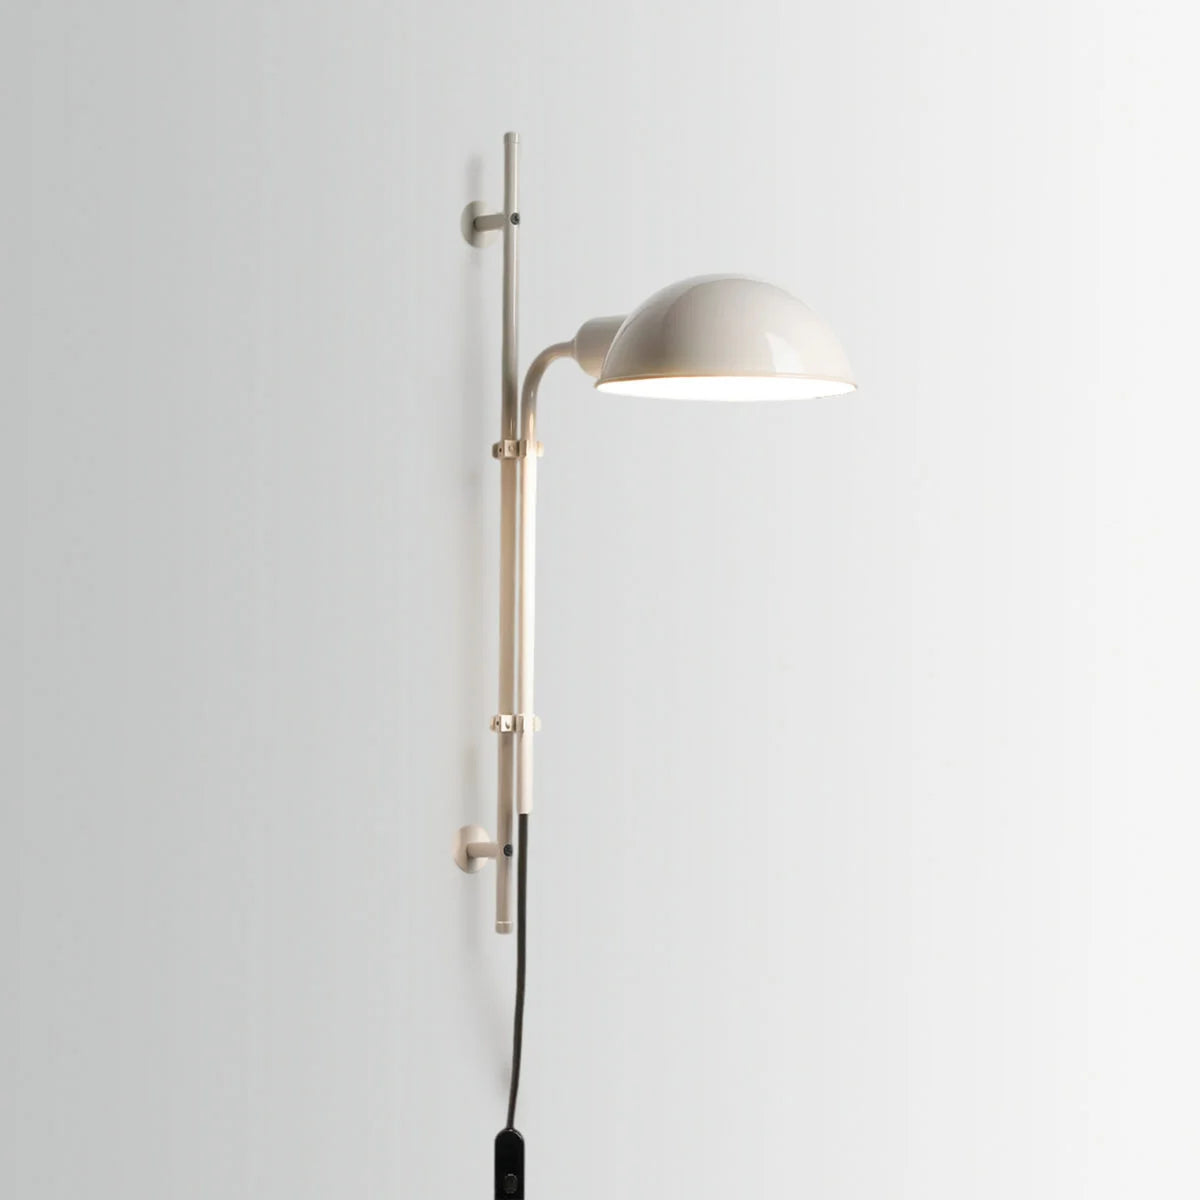 White Practical Wall lamps Task light for Bedroom , Study room by Marset, Spain 